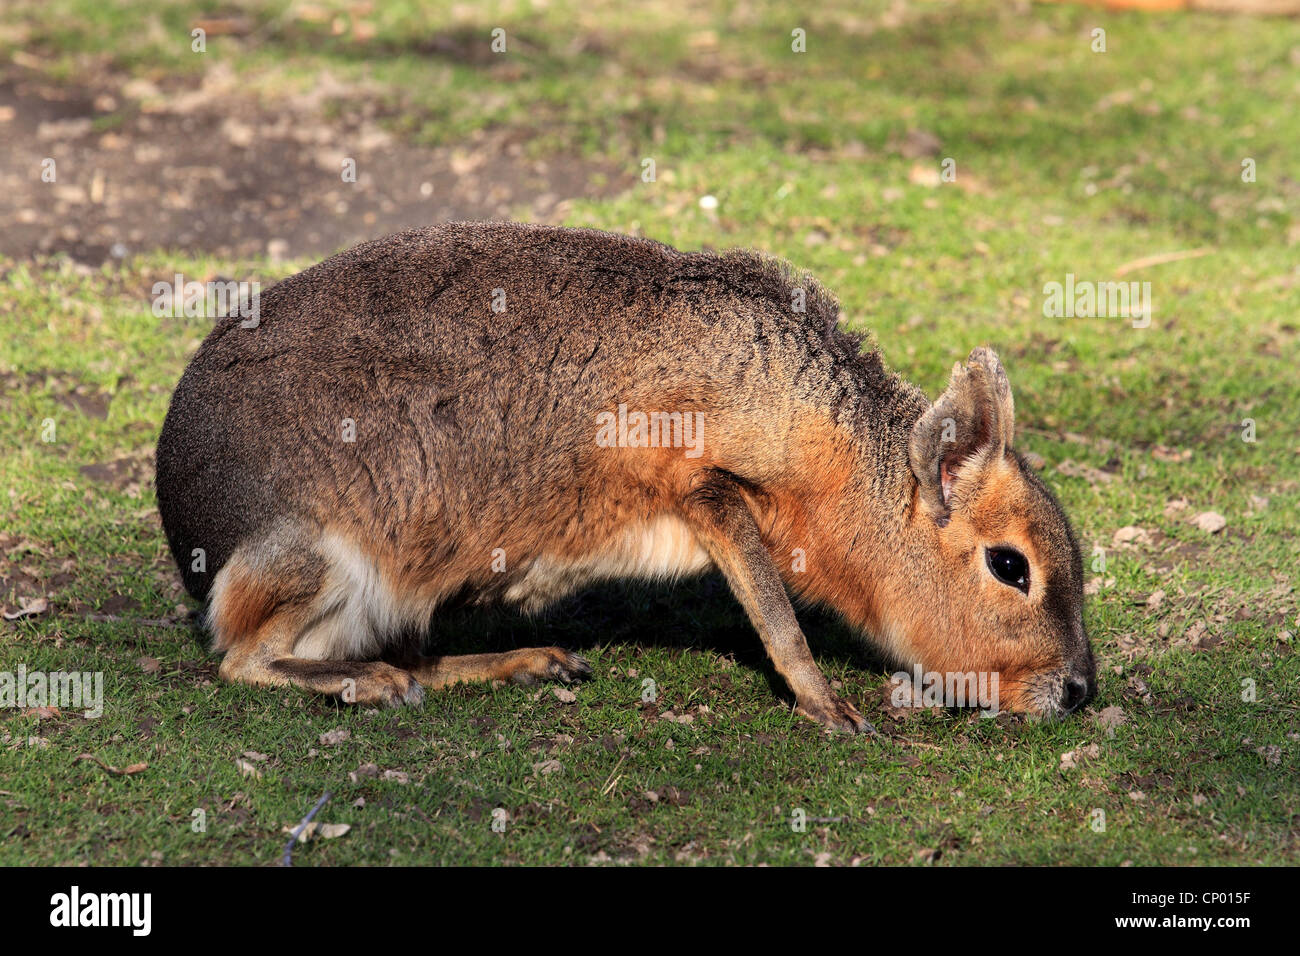 Patagonian cavy (Dolichotis patagonum), sitting in meadow, Chile, Patagonia Stock Photo